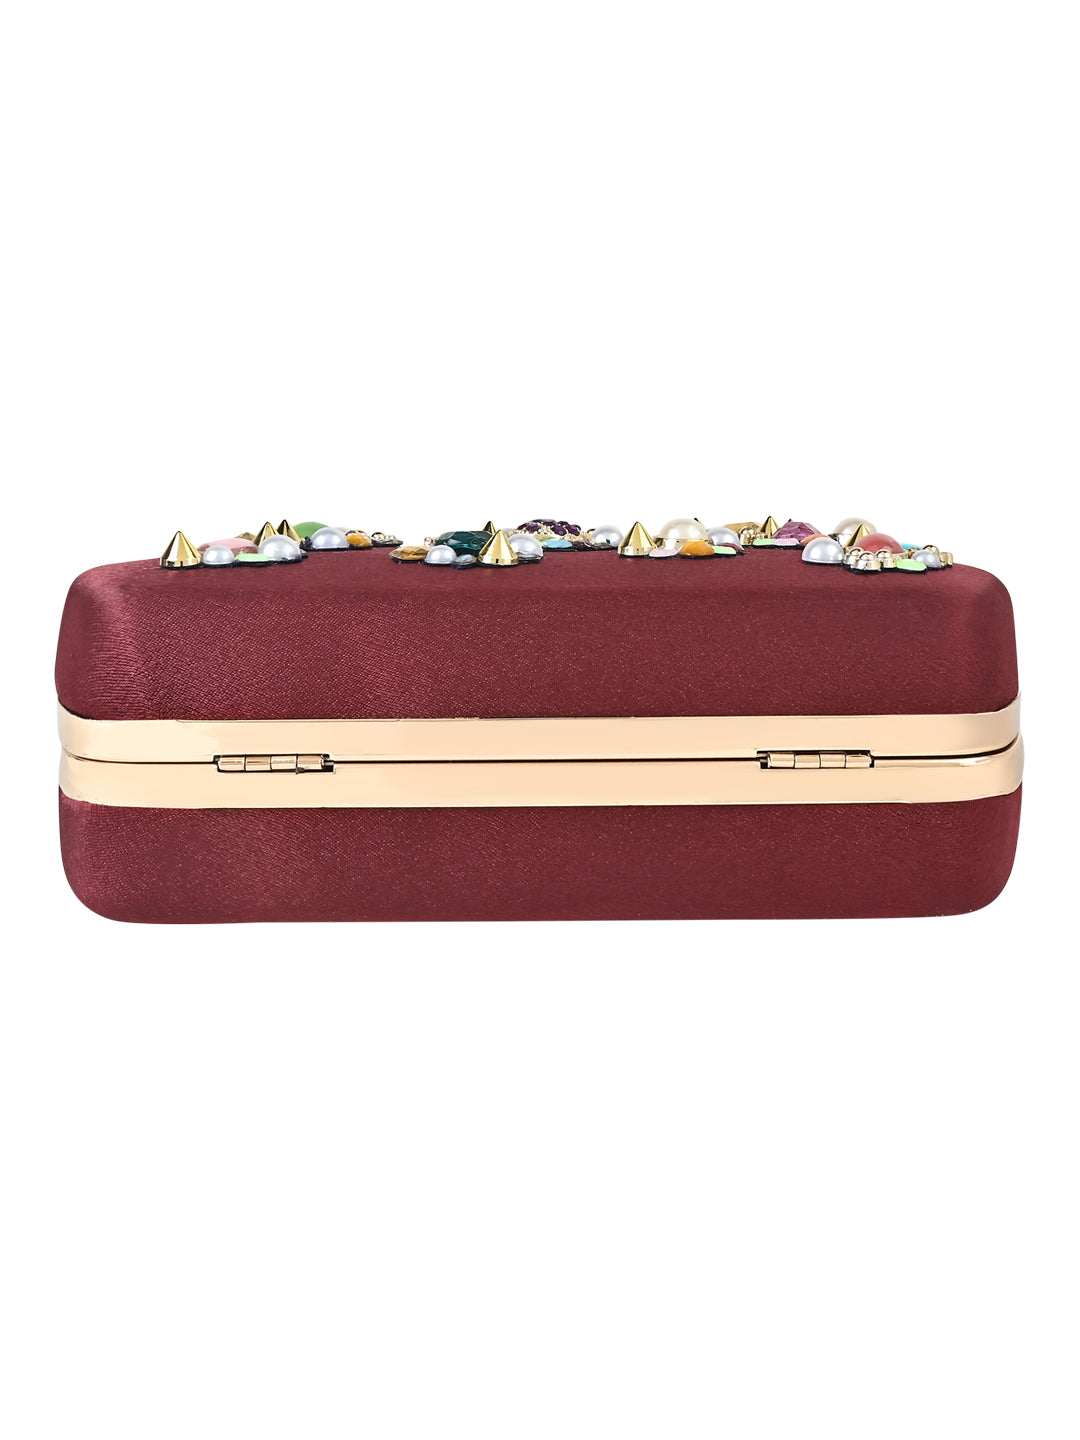 A Vdesi maroon clutch for ladies.